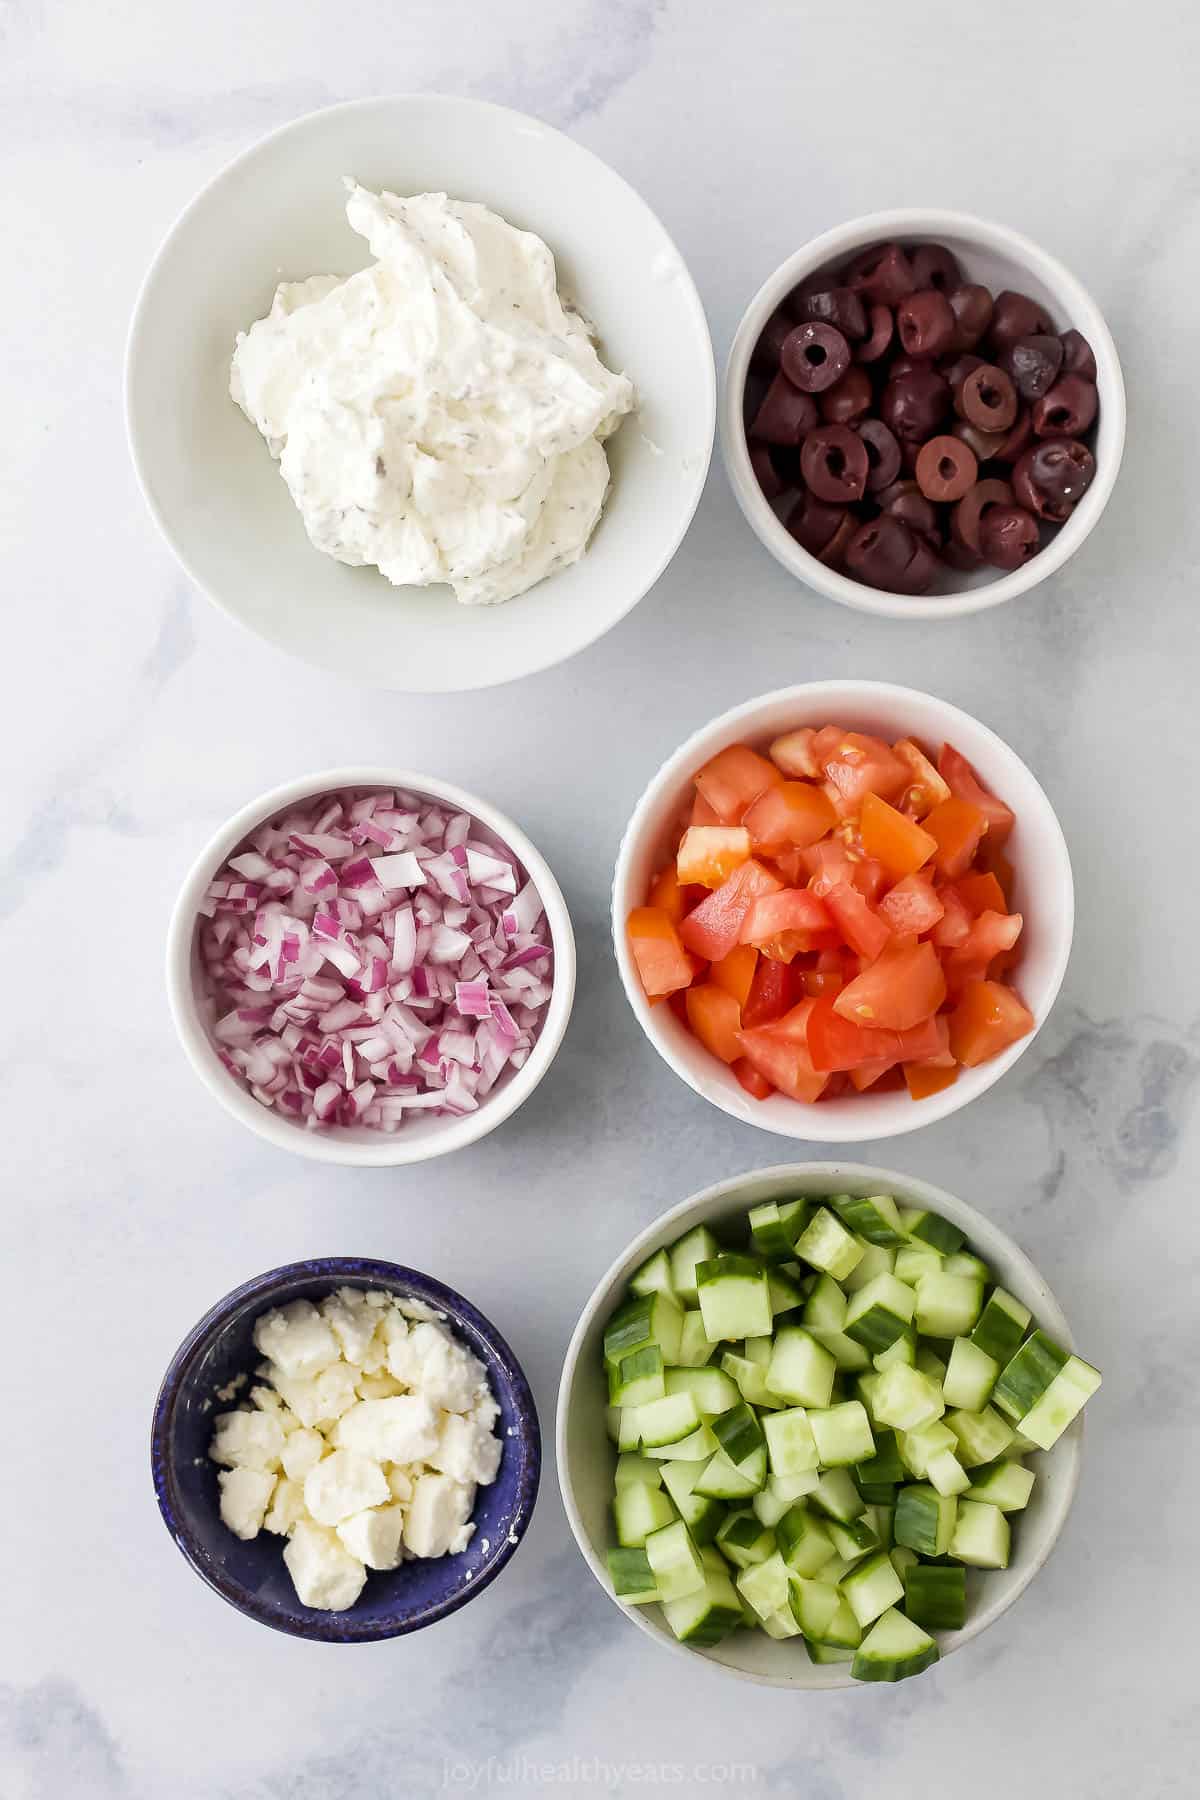 Halved kalamata olives, diced red onion, crumbled feta and the rest of the dip ingredients in separate bowls on a marble surface